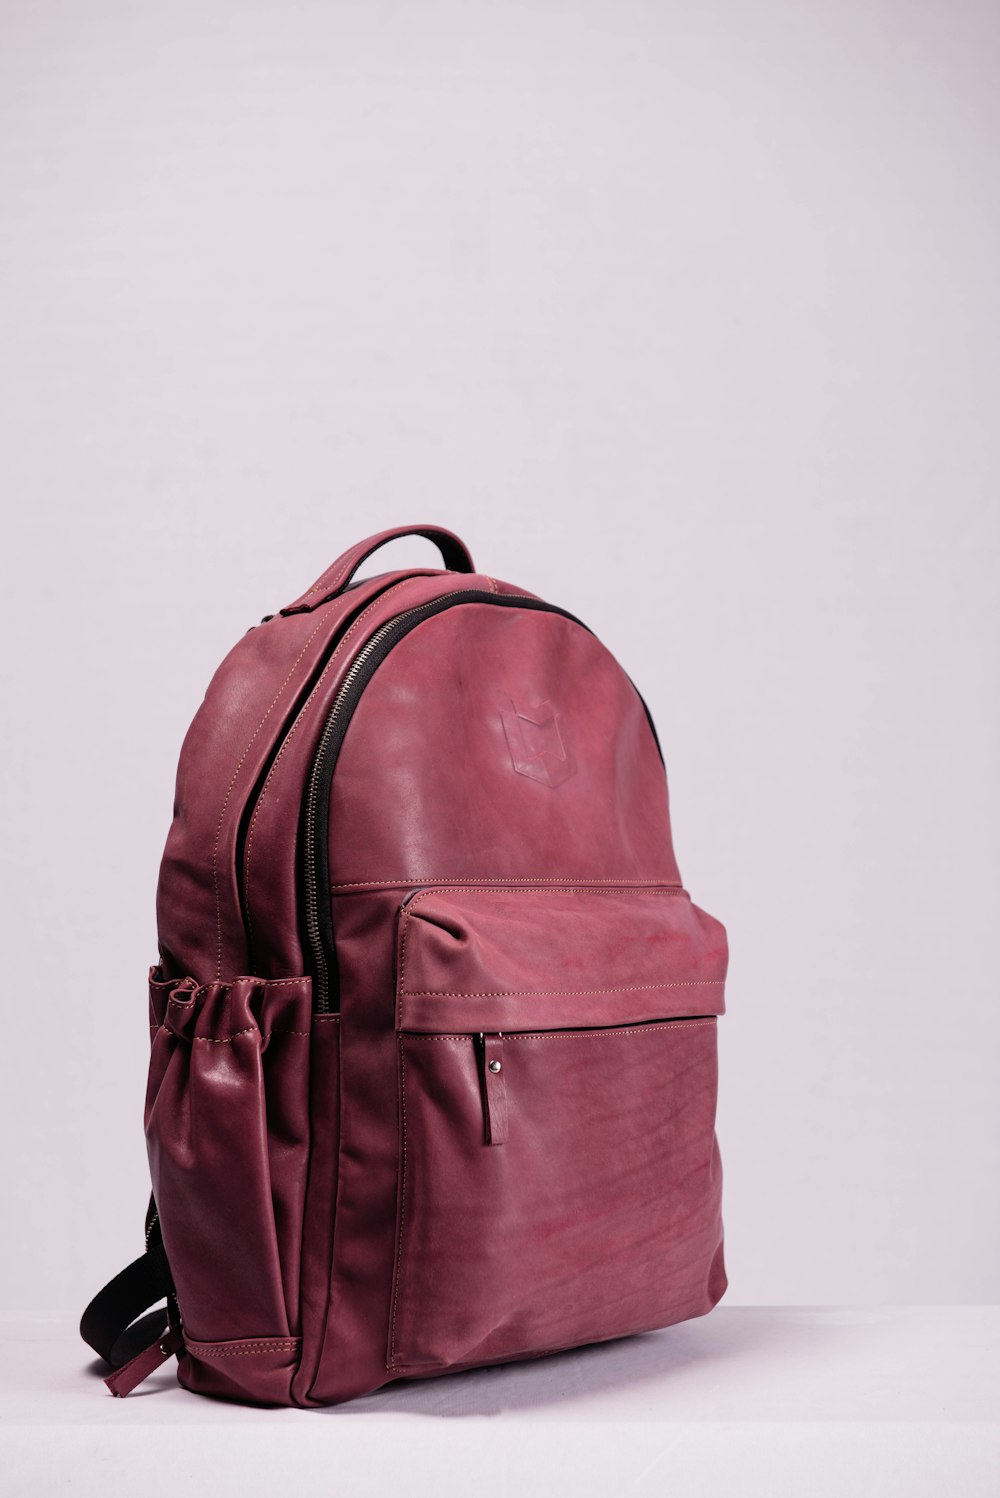 red leather backpack on white wall